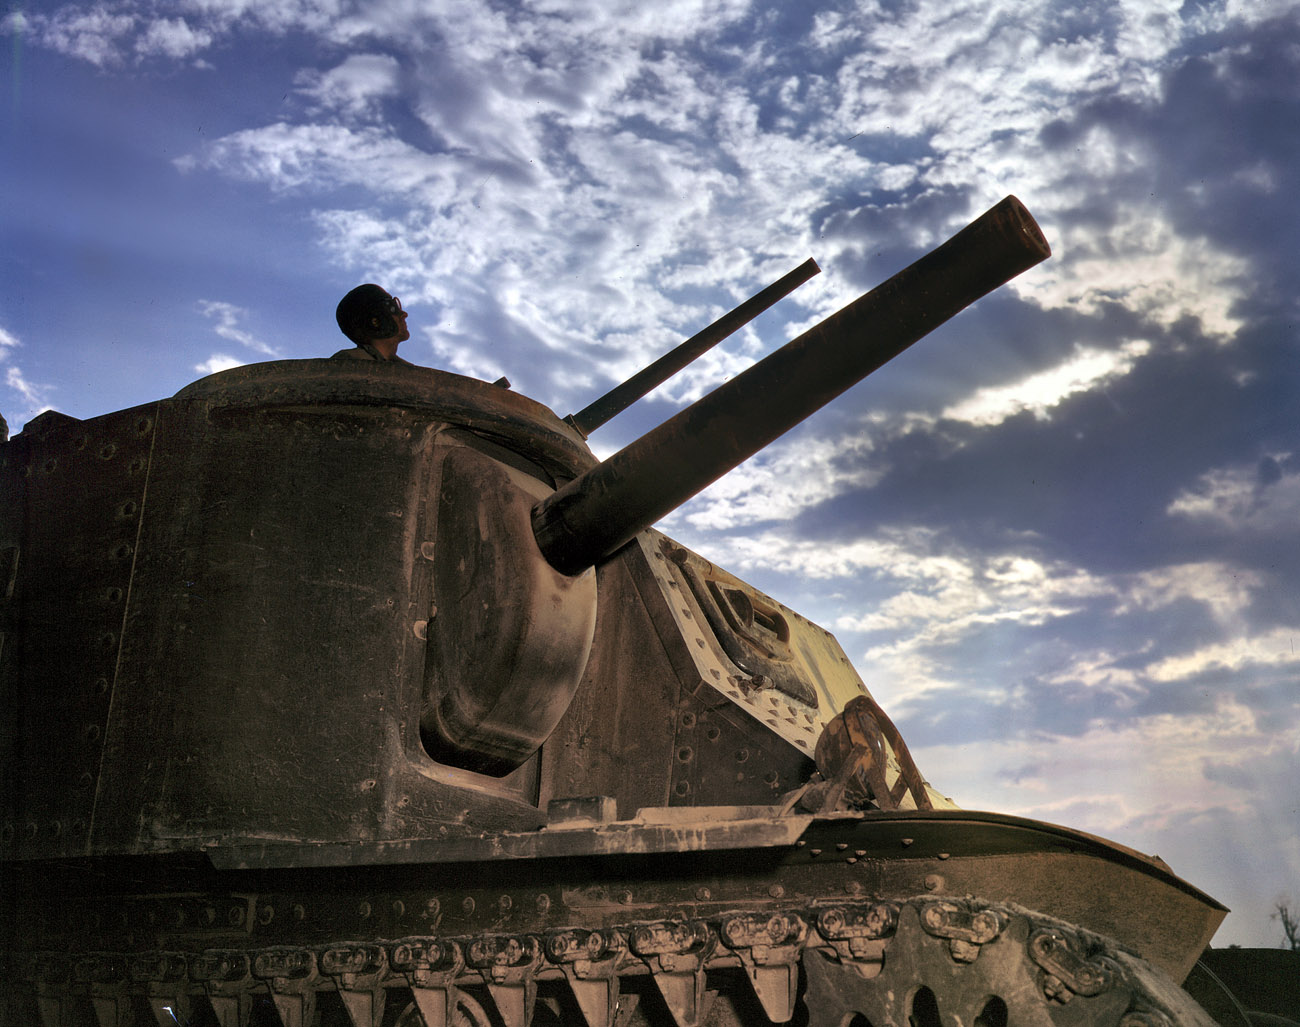 June 1942. Fort Knox, Kentucky. "The crew of an M-3 tank learns all the ways of causing trouble for the Axis with a 75mm gun, a 37mm gun and four machine guns." 4x5 Kodachrome transparency by Alfred Palmer, OWI. View full size.